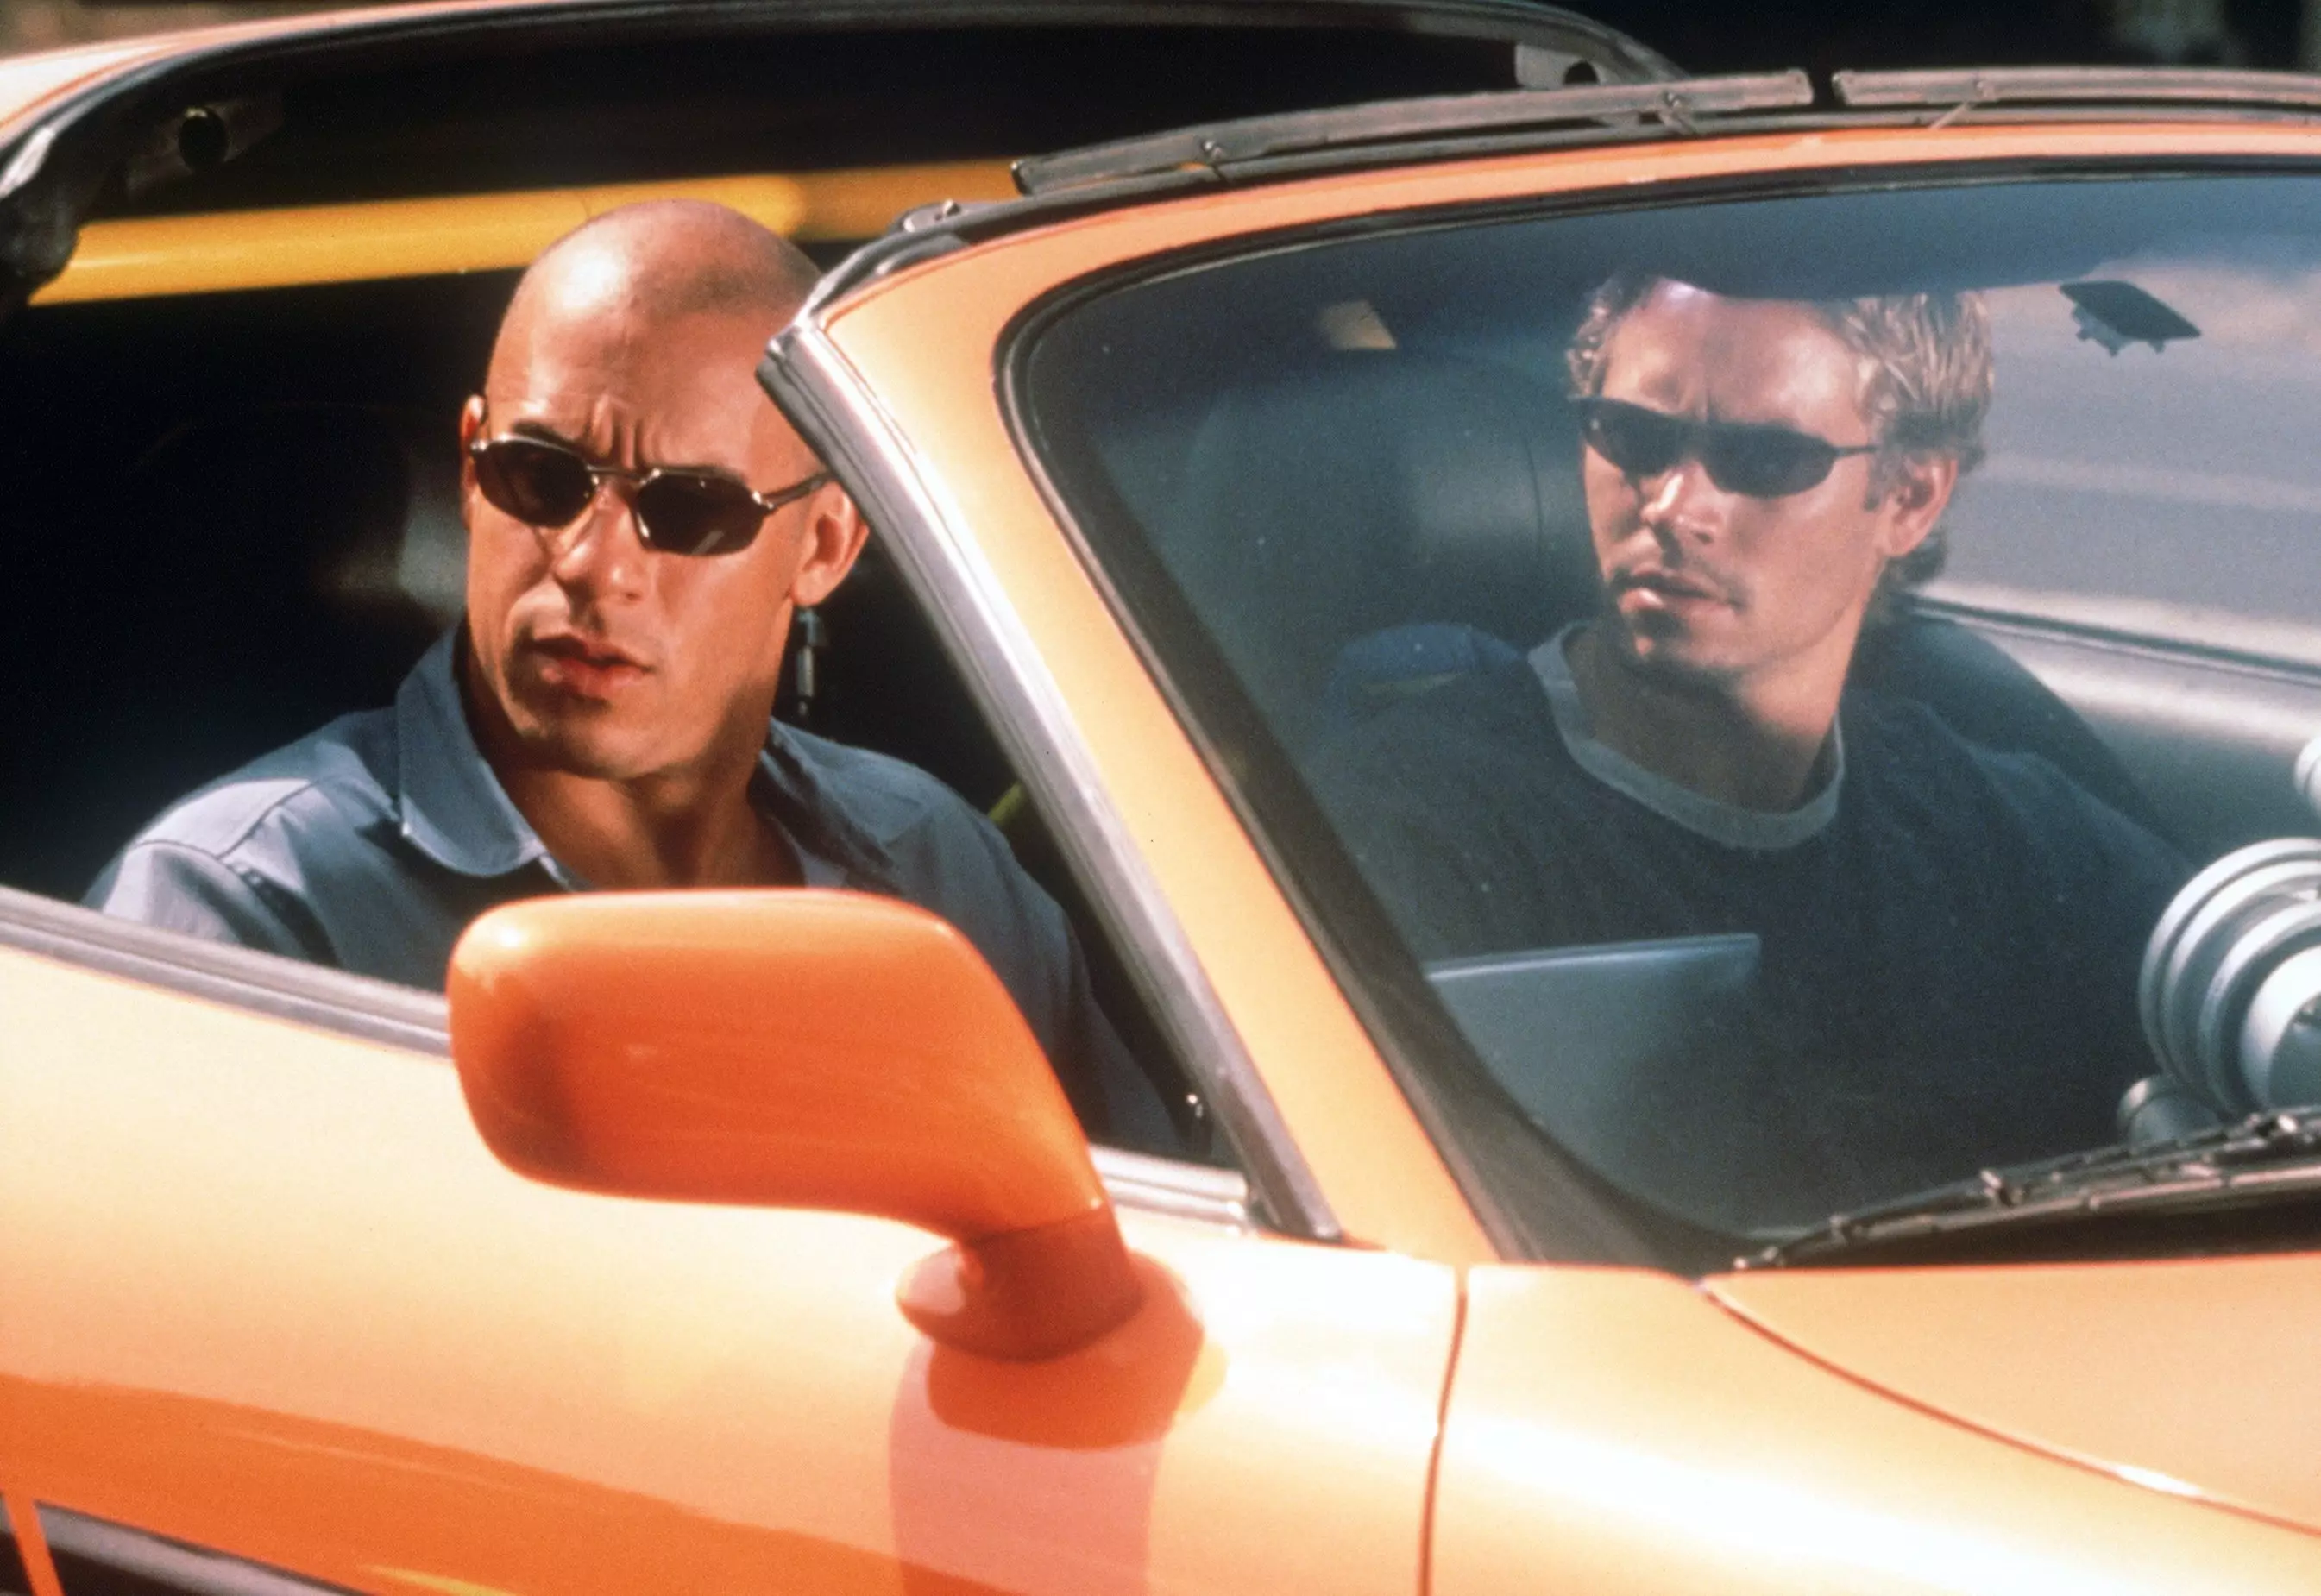 Vin Diesel and Paul Walker in The Fast and the Furious in 1999.